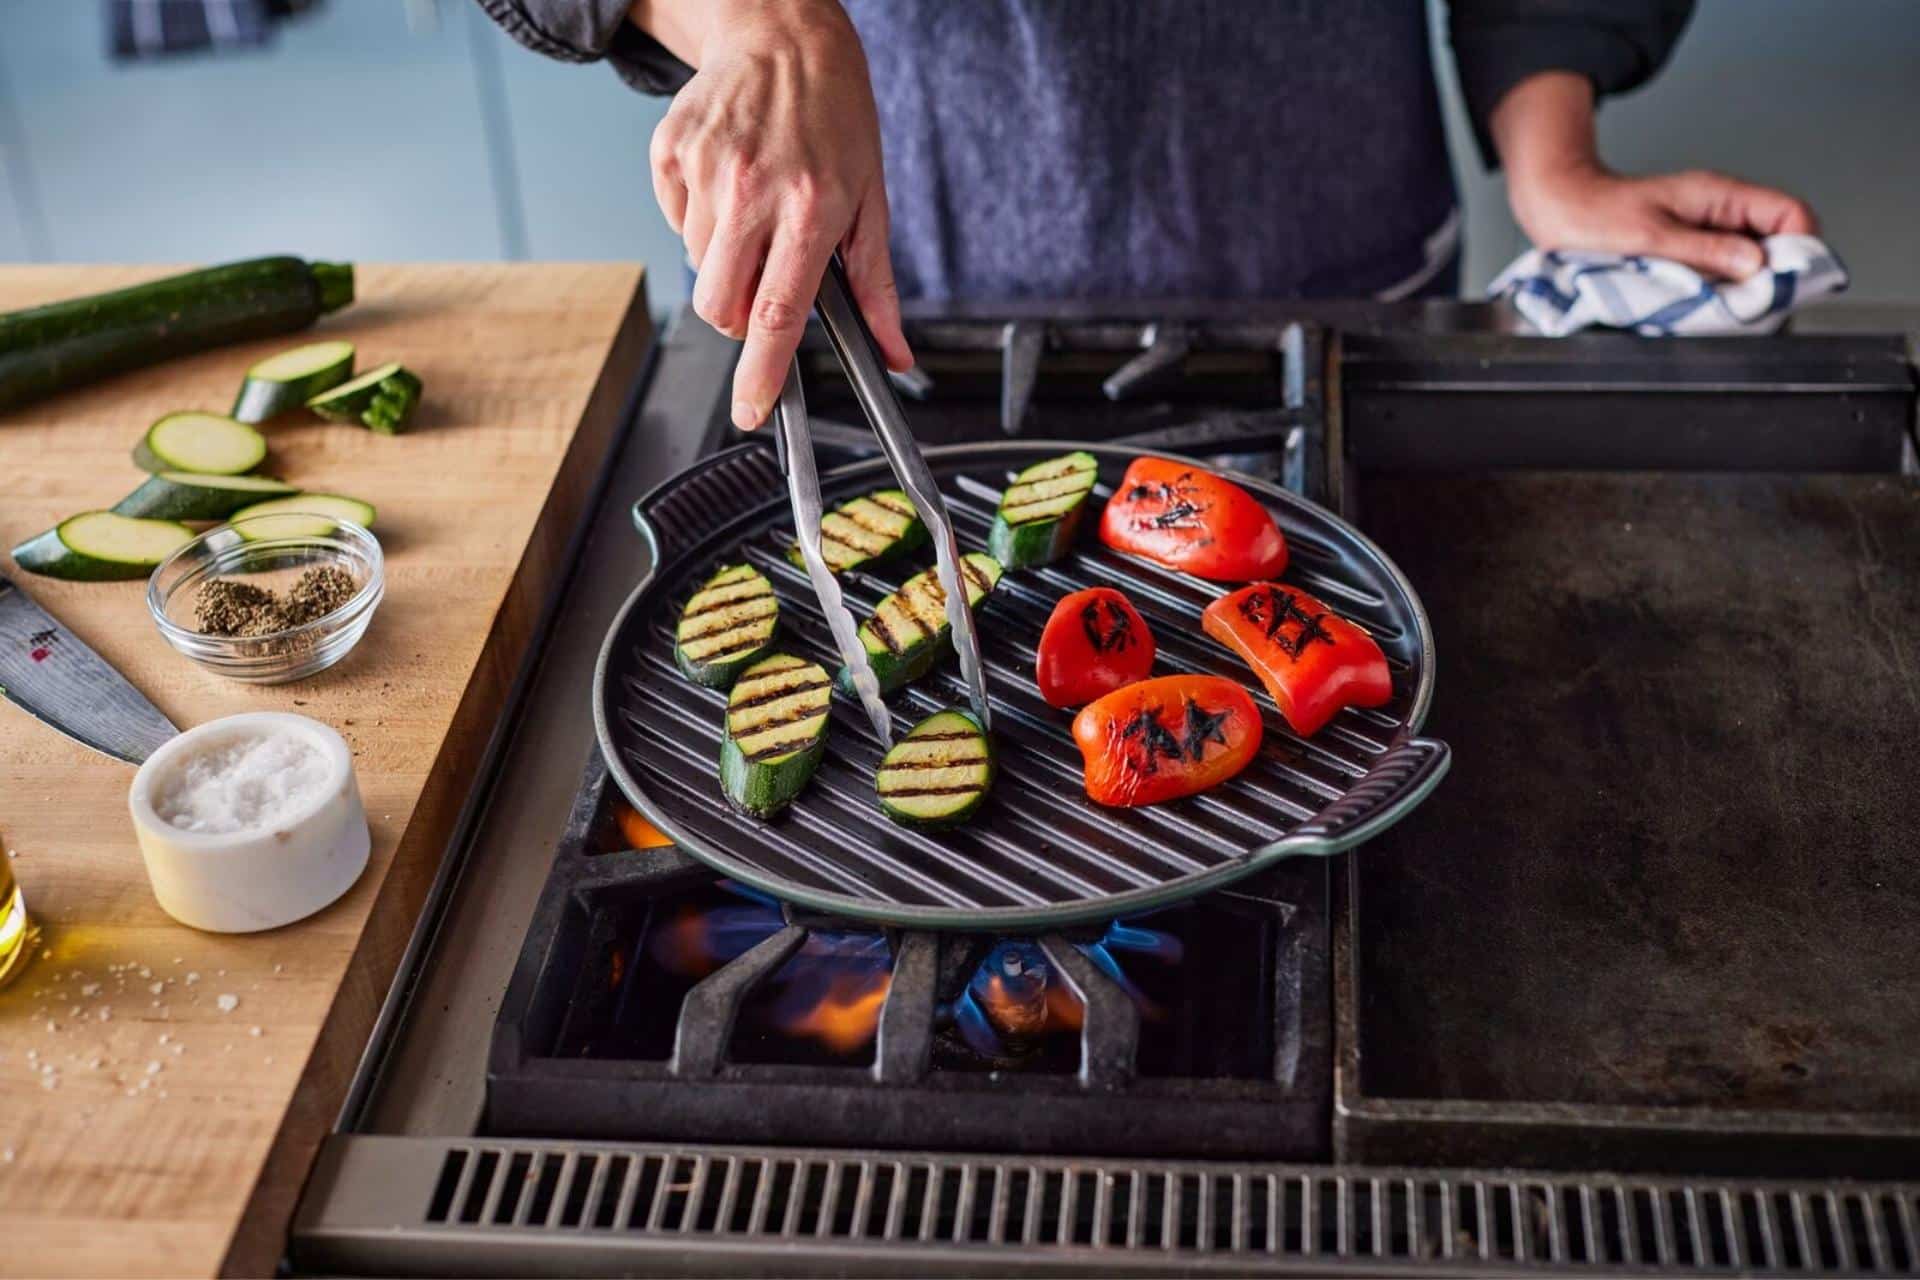 5 Reasons Why You Should Buy a Stovetop Grill Pan